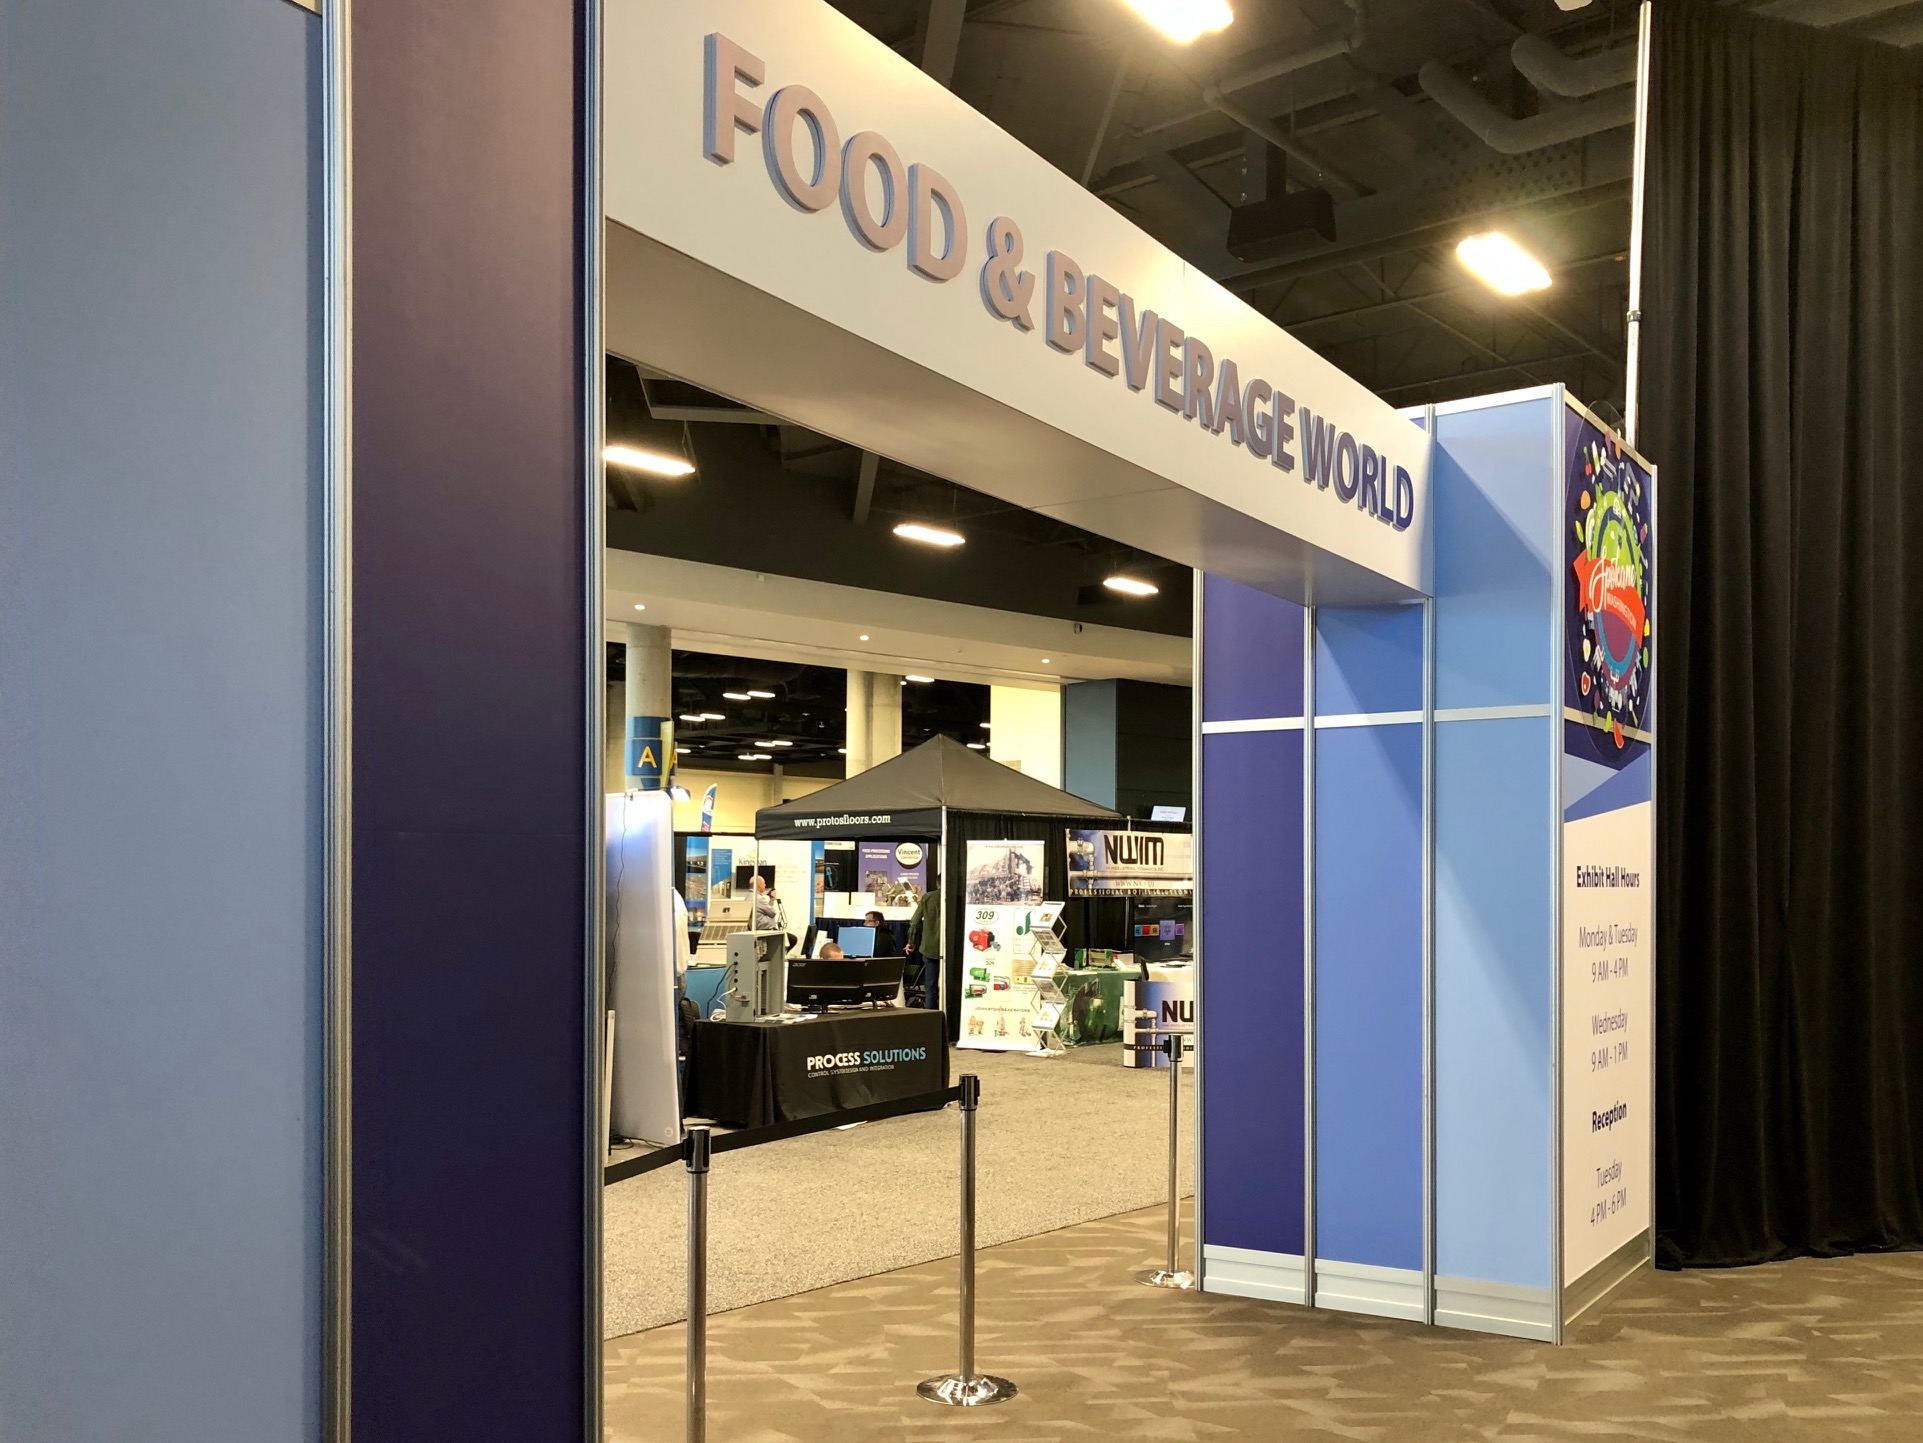 You are currently viewing Process Solutions Showcases Machine Monitoring Software and Airixa Refrigeration Control Systems at Northwest Food & Beverage World 2020